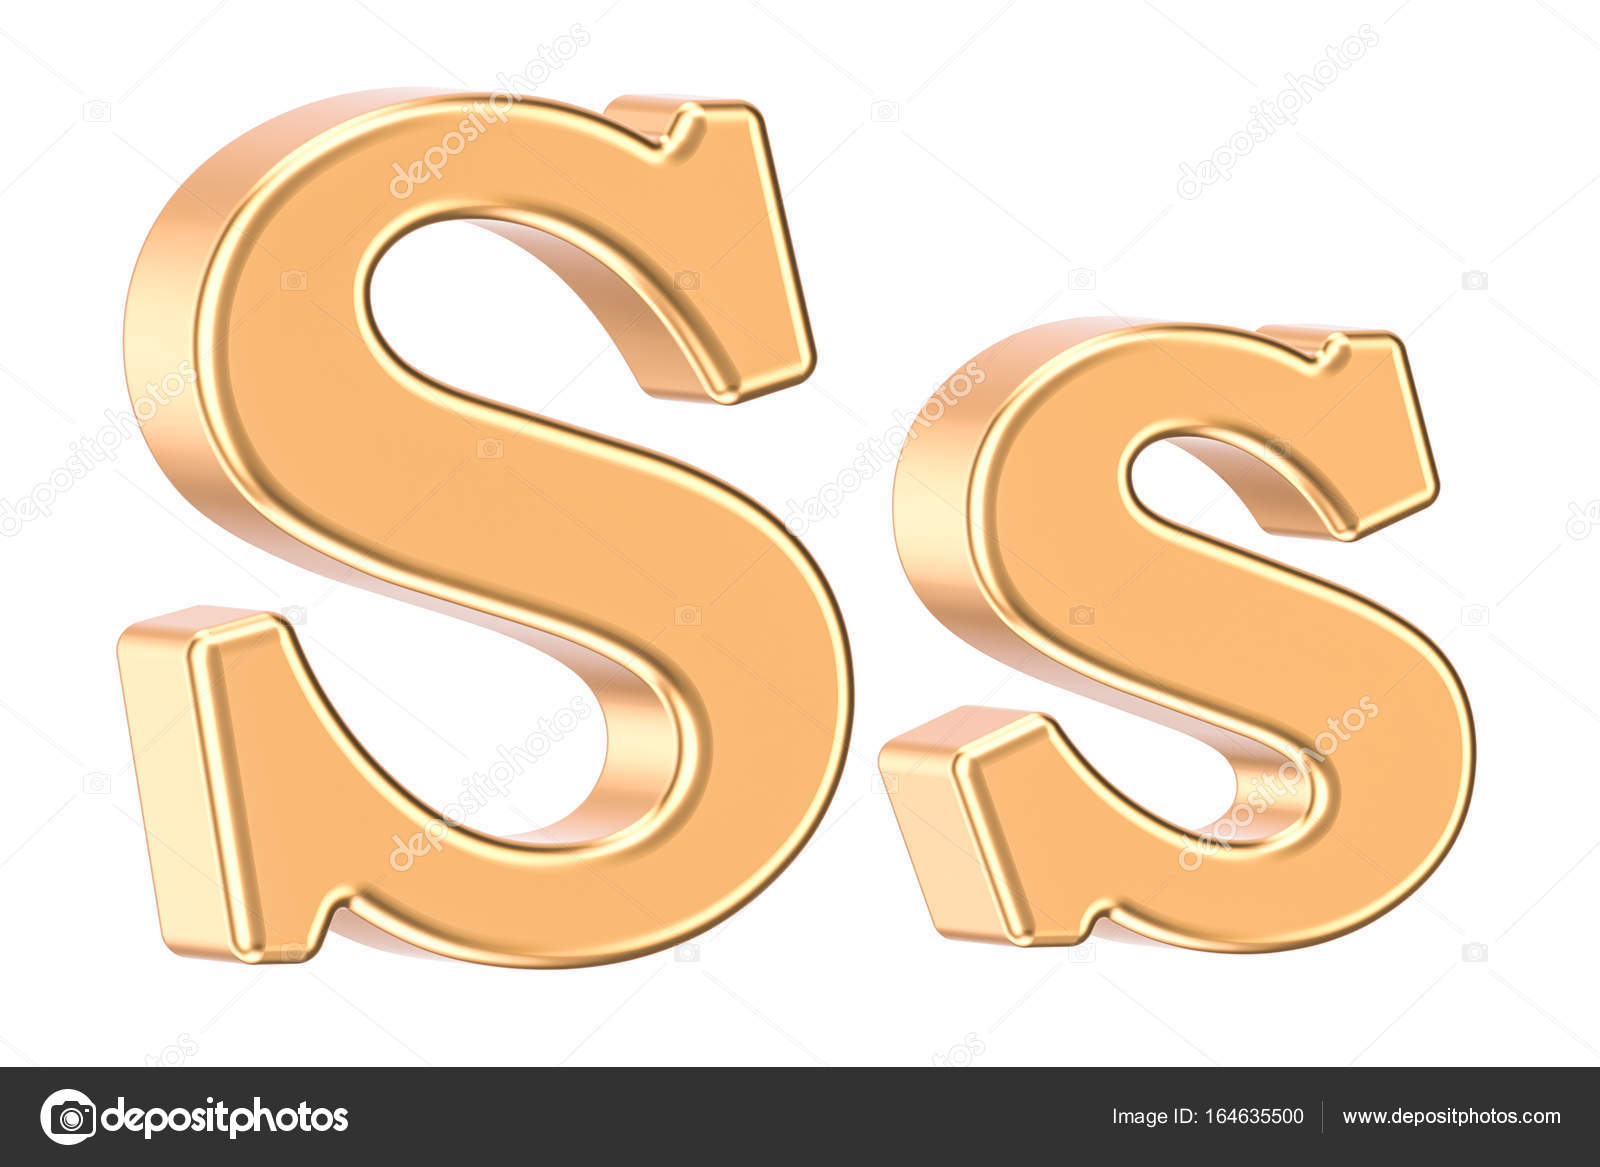 ᐈ Images Stock Photos Royalty Free Letter S Logo Pictures Download On Depositphotos